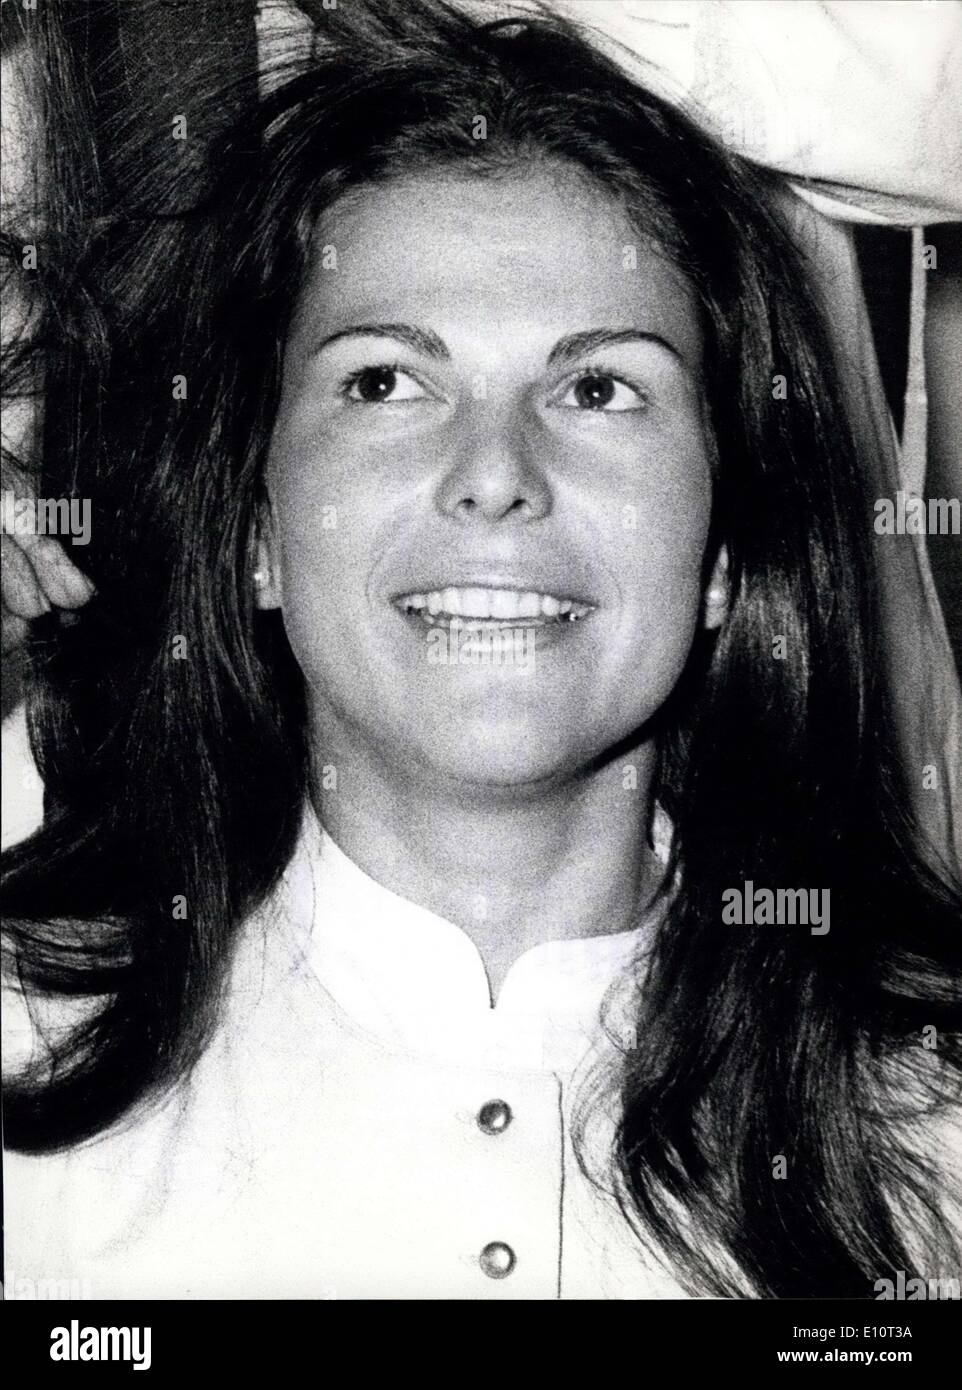 Jan. 11, 1974 - Willl German girl Silvia Sommerlath become Queen of Sweden?: Topic number one in these days in Sweden's capital Stock Photo